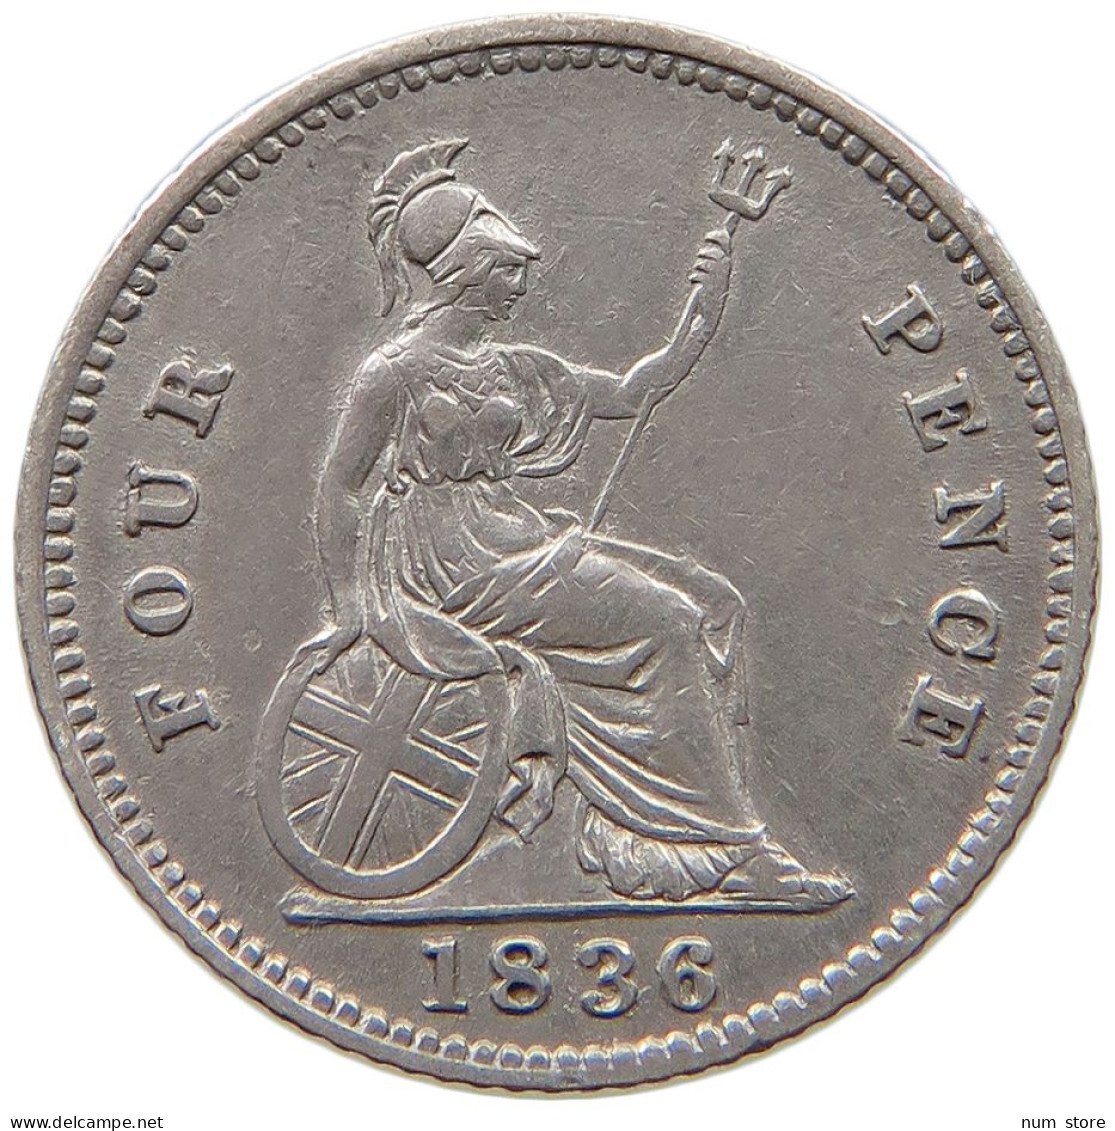 GREAT BRITAIN FOURPENCE 1836 WILLIAM IV. (1830-1837) #t092 0521 - G. 4 Pence/ Groat